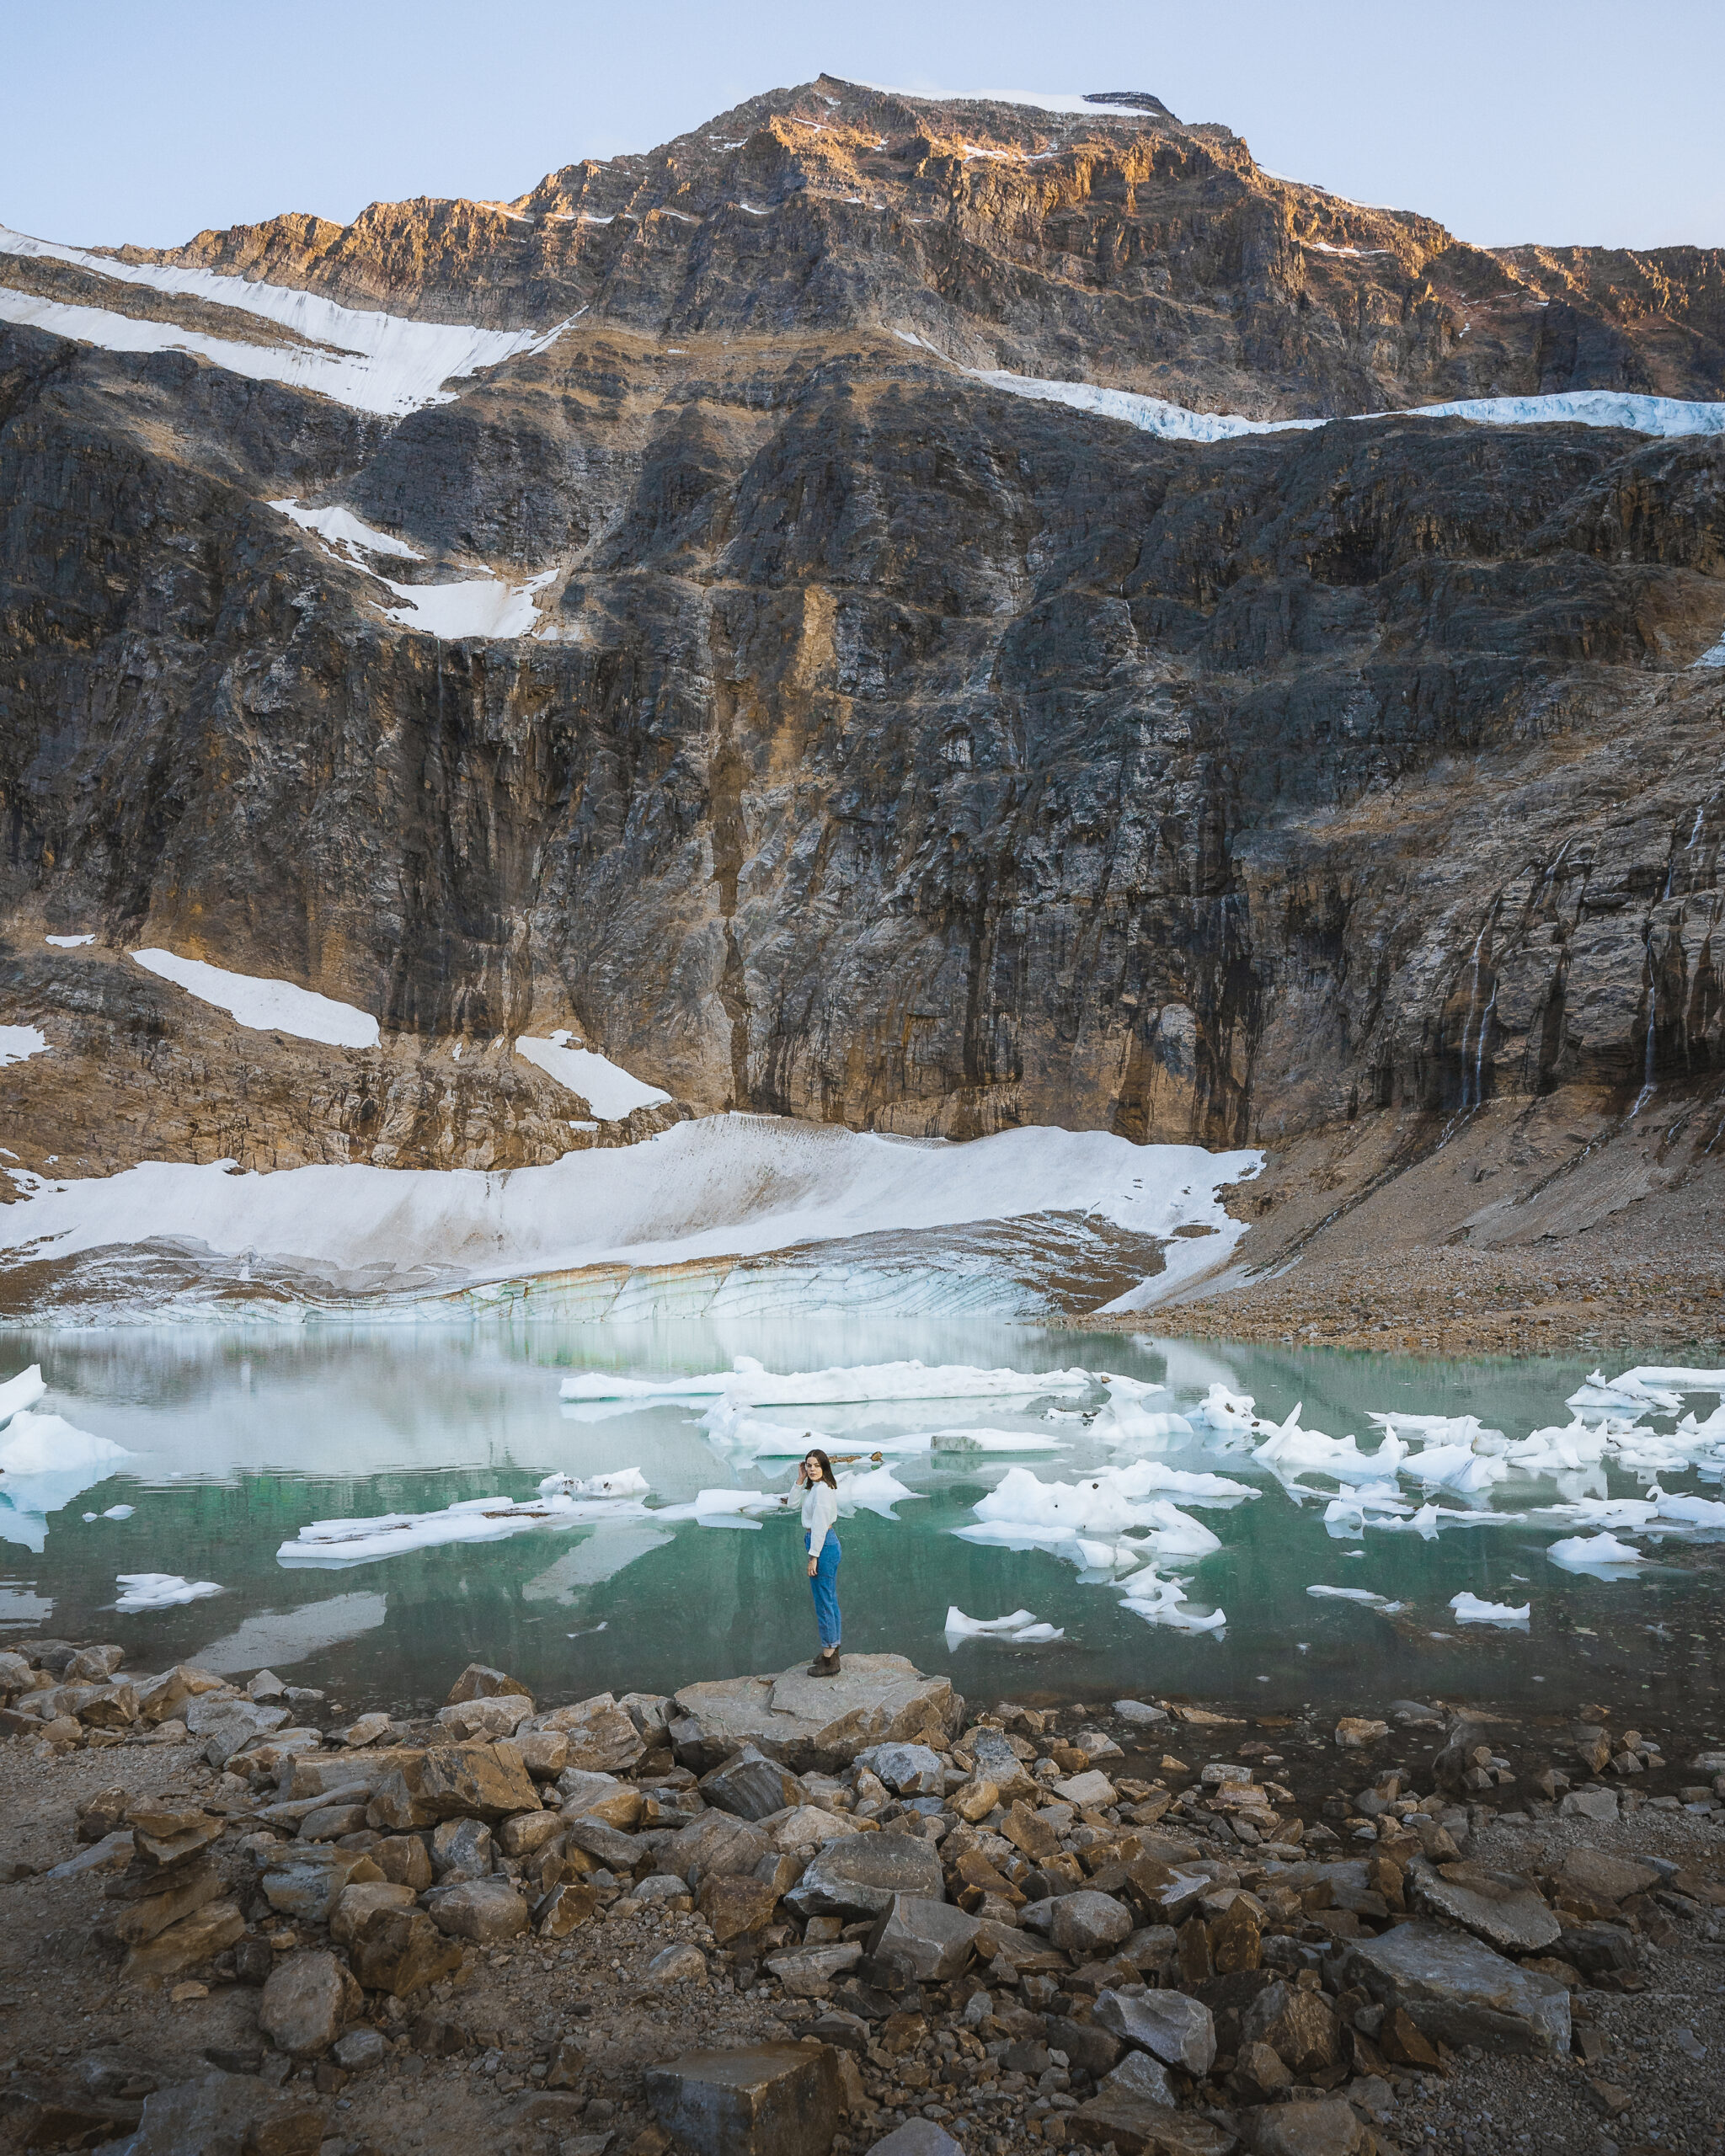 standing at the base of mount edith cavell by Cavell pond